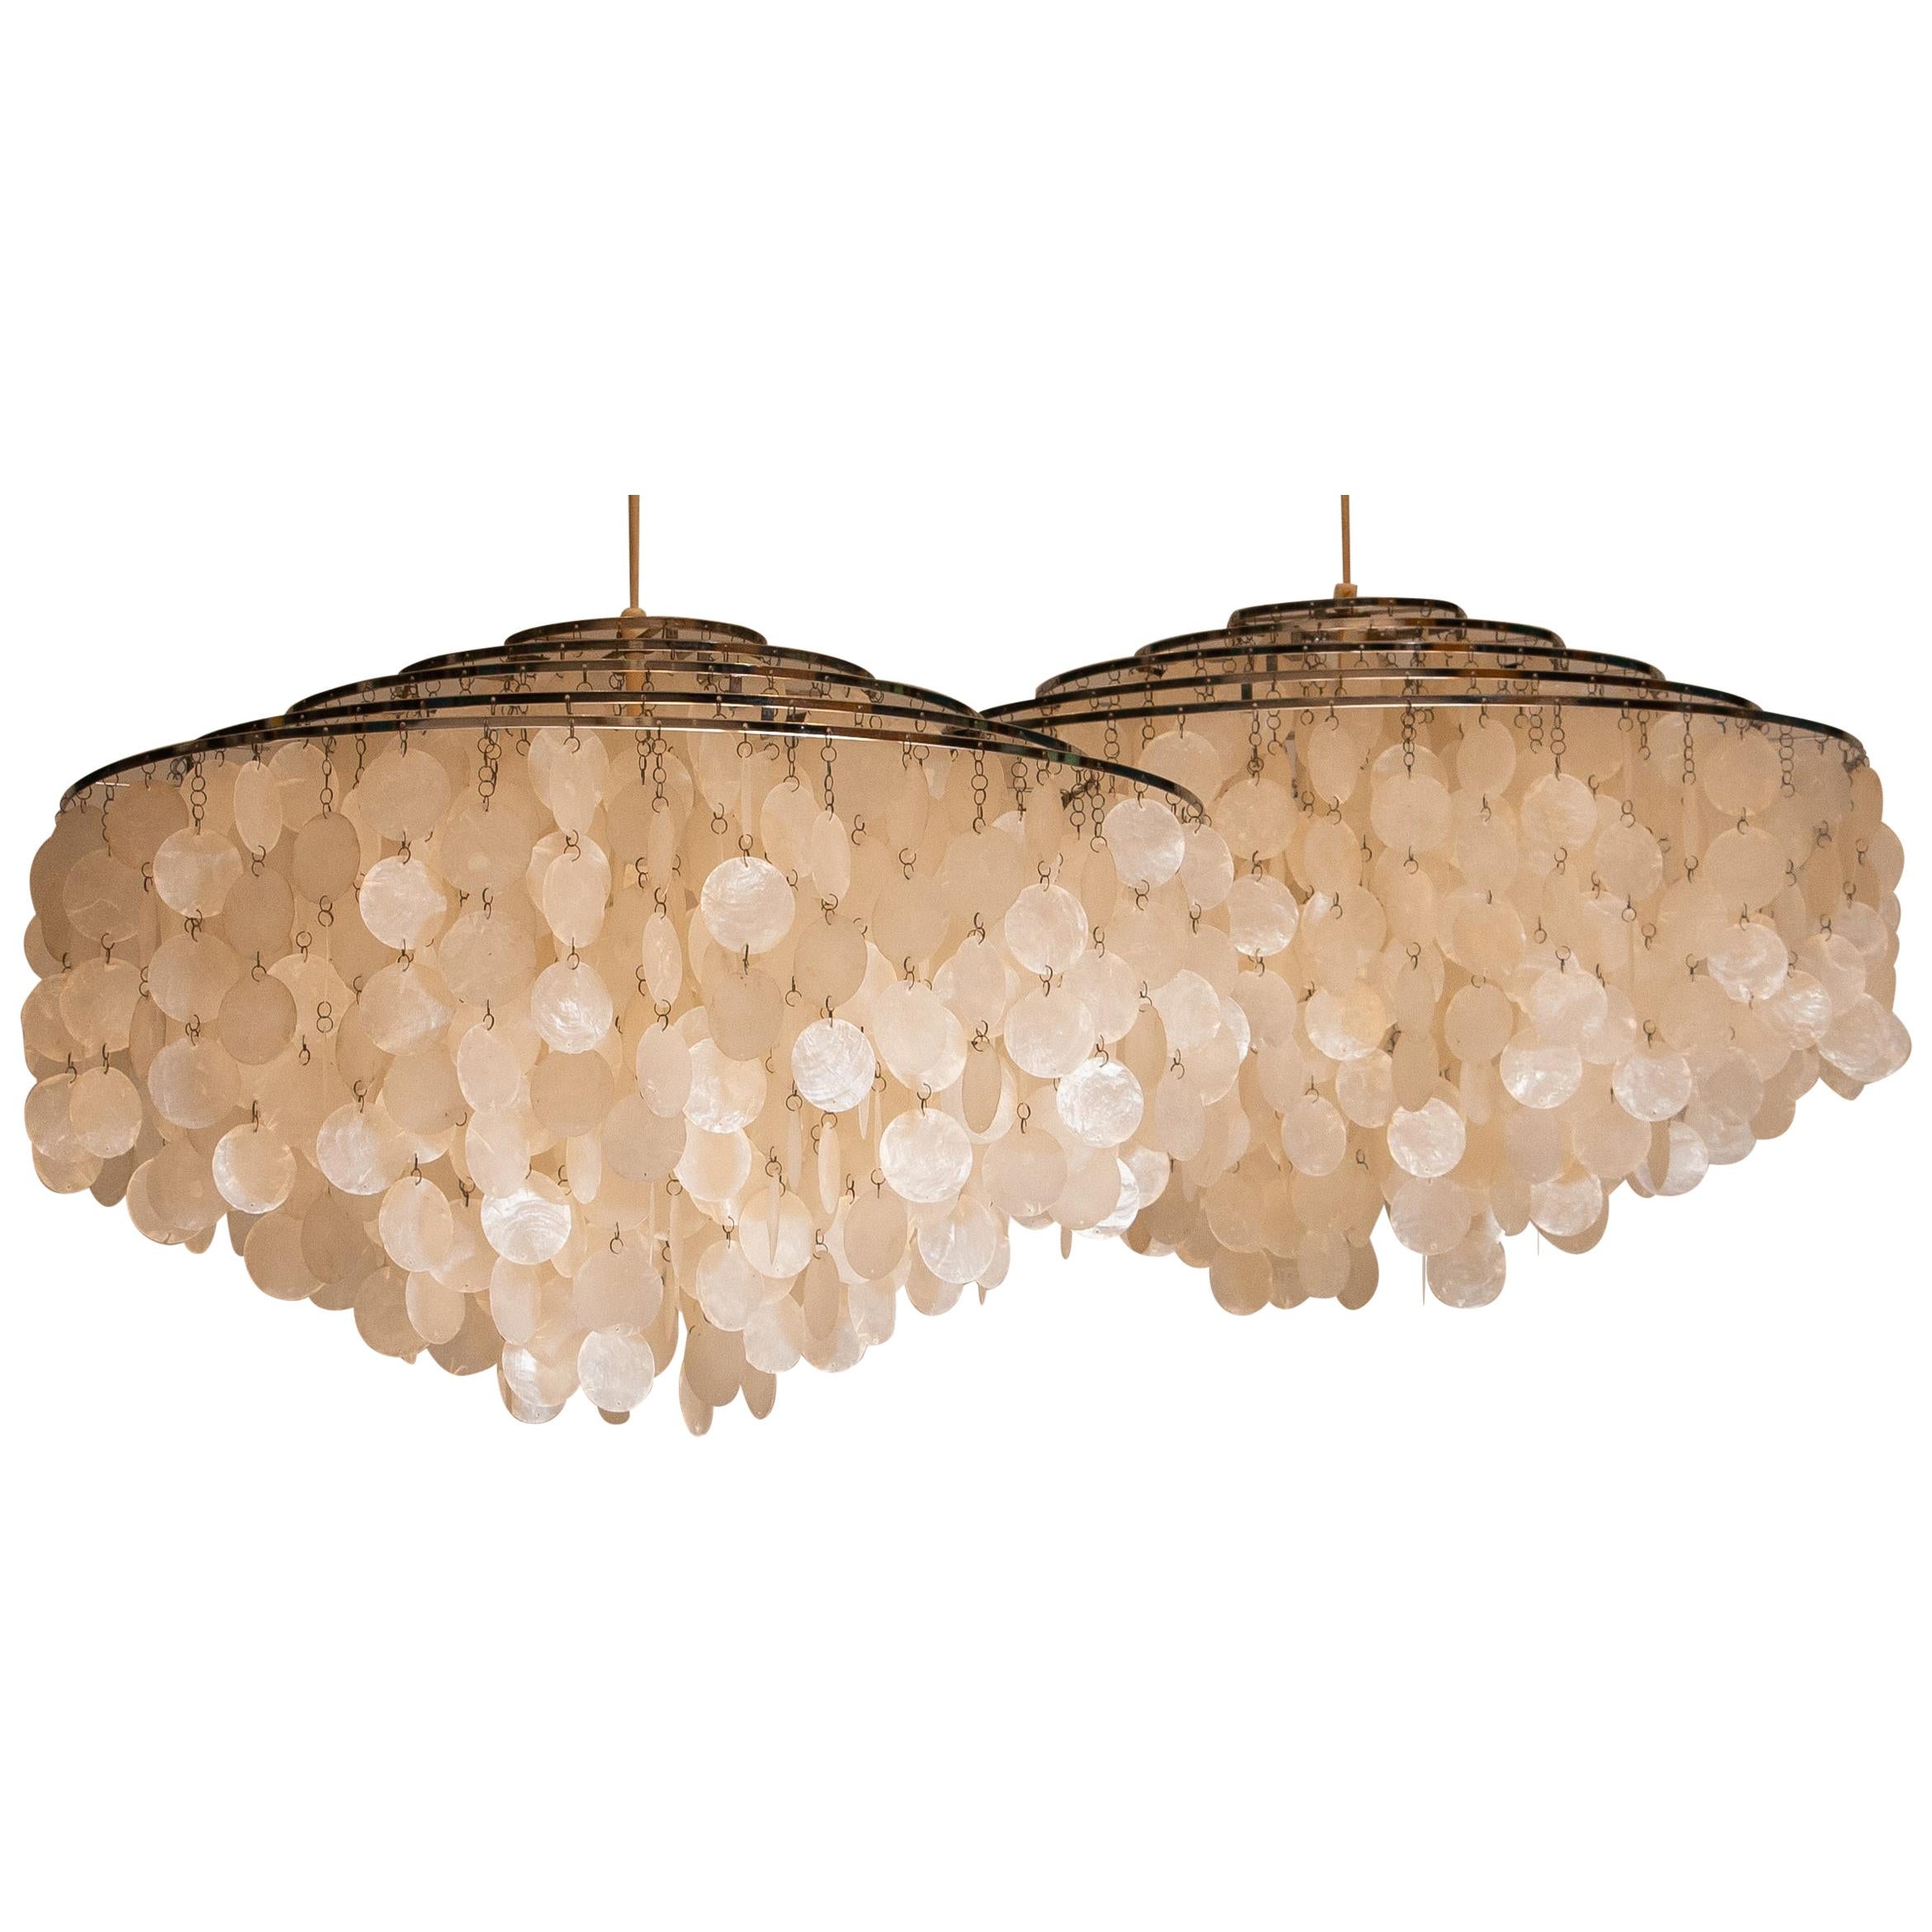 Beautiful set of two complete original extra large capiz shell chandeliers designed by Verner Panton for J. Luber Ag in Switzerland, 1964.
These two extra large chandeliers measures a diameter of 70cm. or 27.56